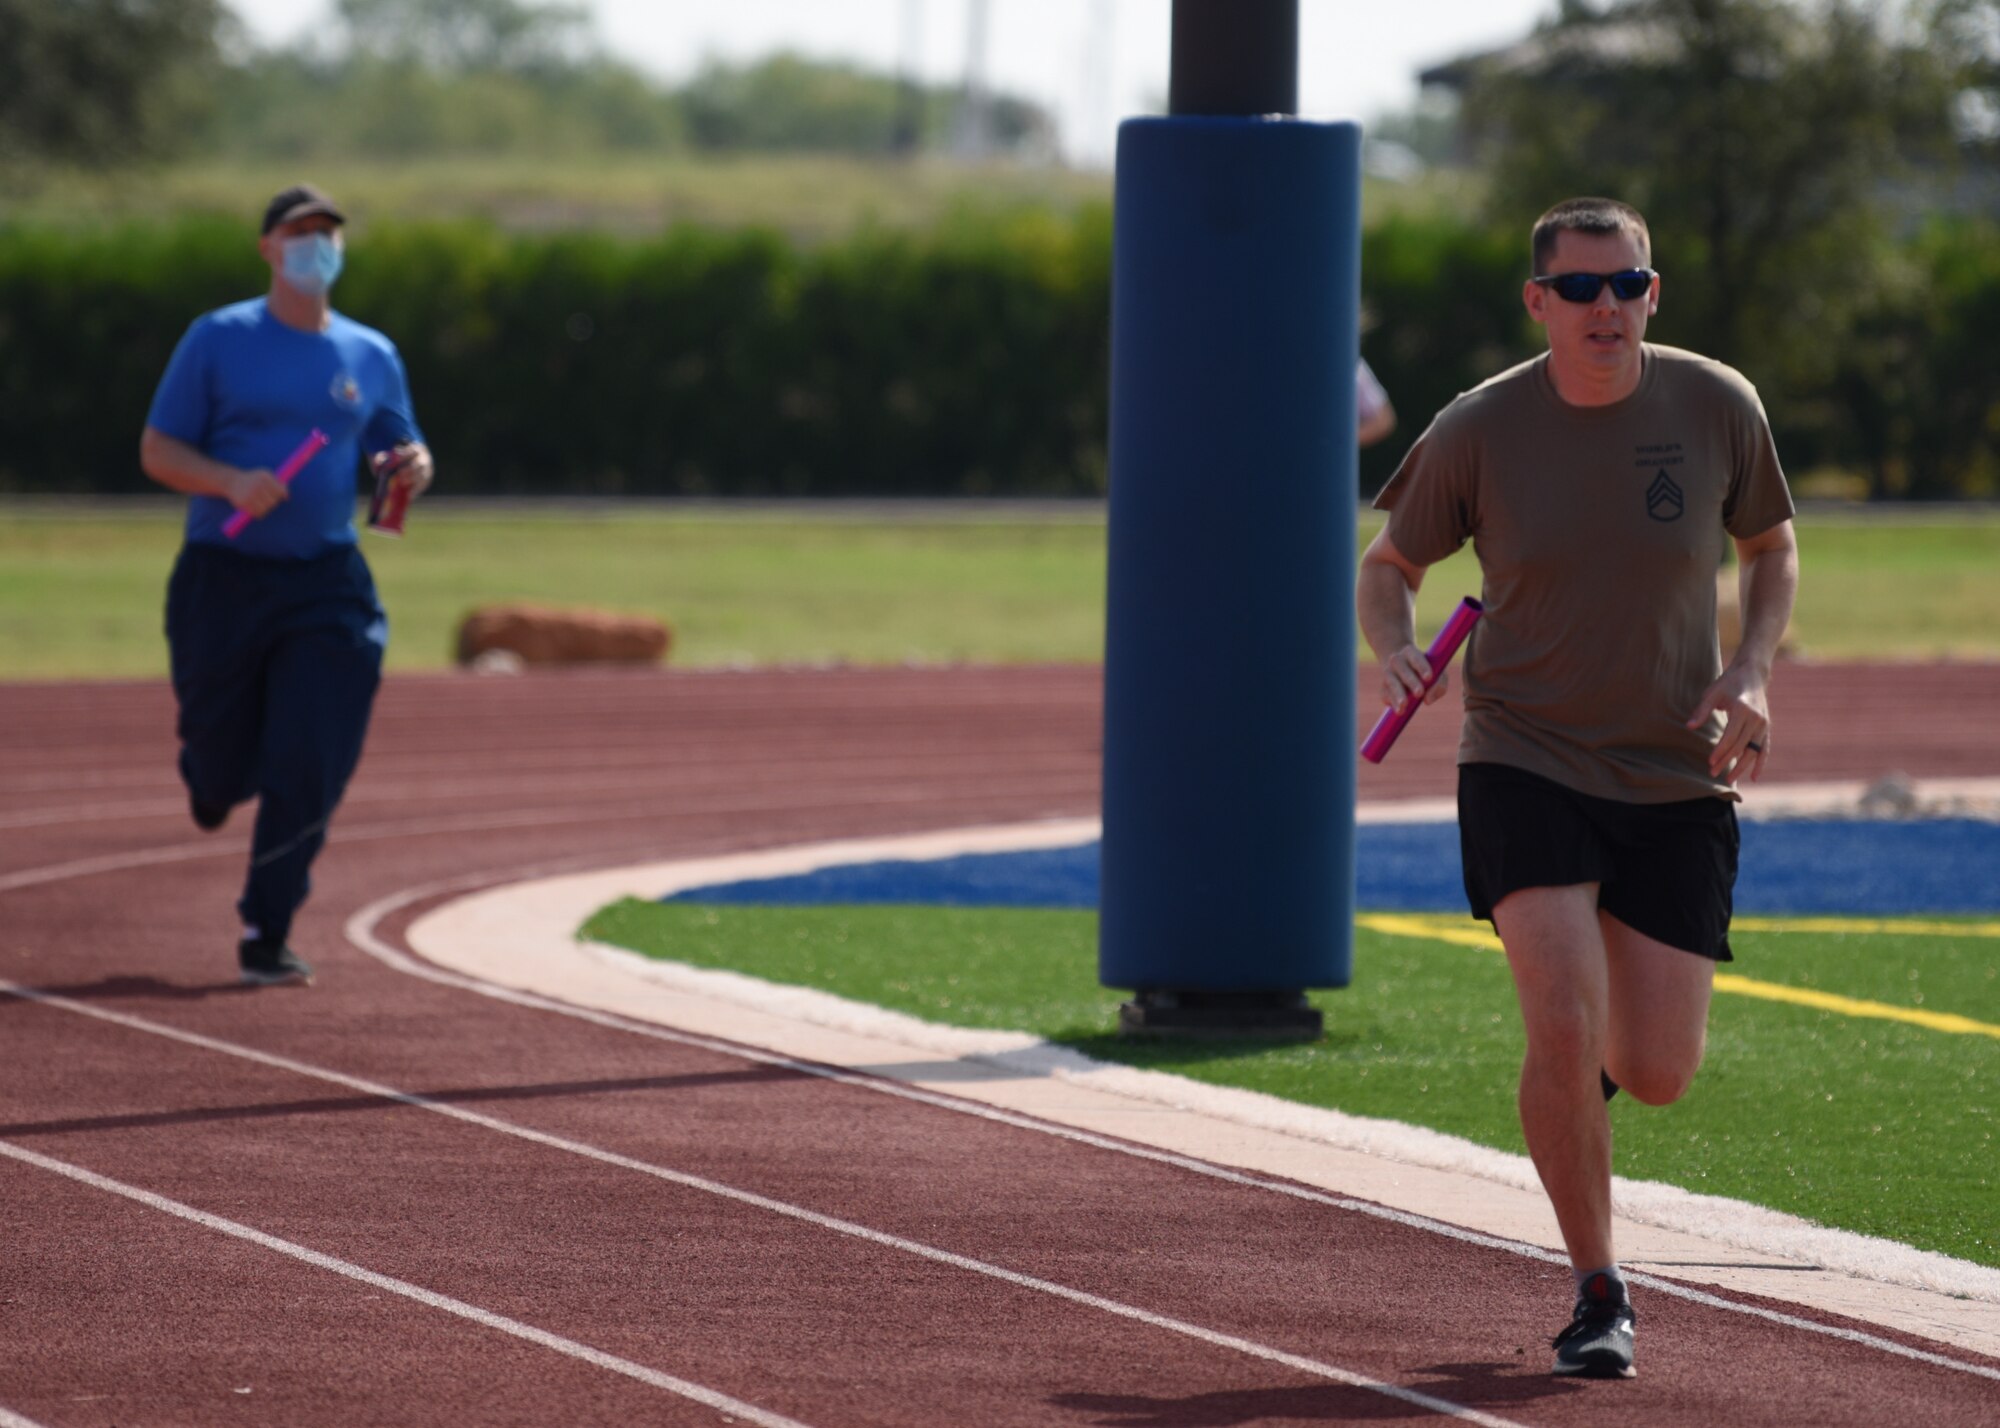 Participants run with batons around the track during the Suicide Awareness 24 Hour Run/Walk at the Mathis Field Track on Goodfellow Air Force Base, Texas, Sept. 18, 2020. The event celebrated life and encouraged participants to check on their wingmen. (U.S. Air Force photo by Airman 1st Class Ethan Sherwood)